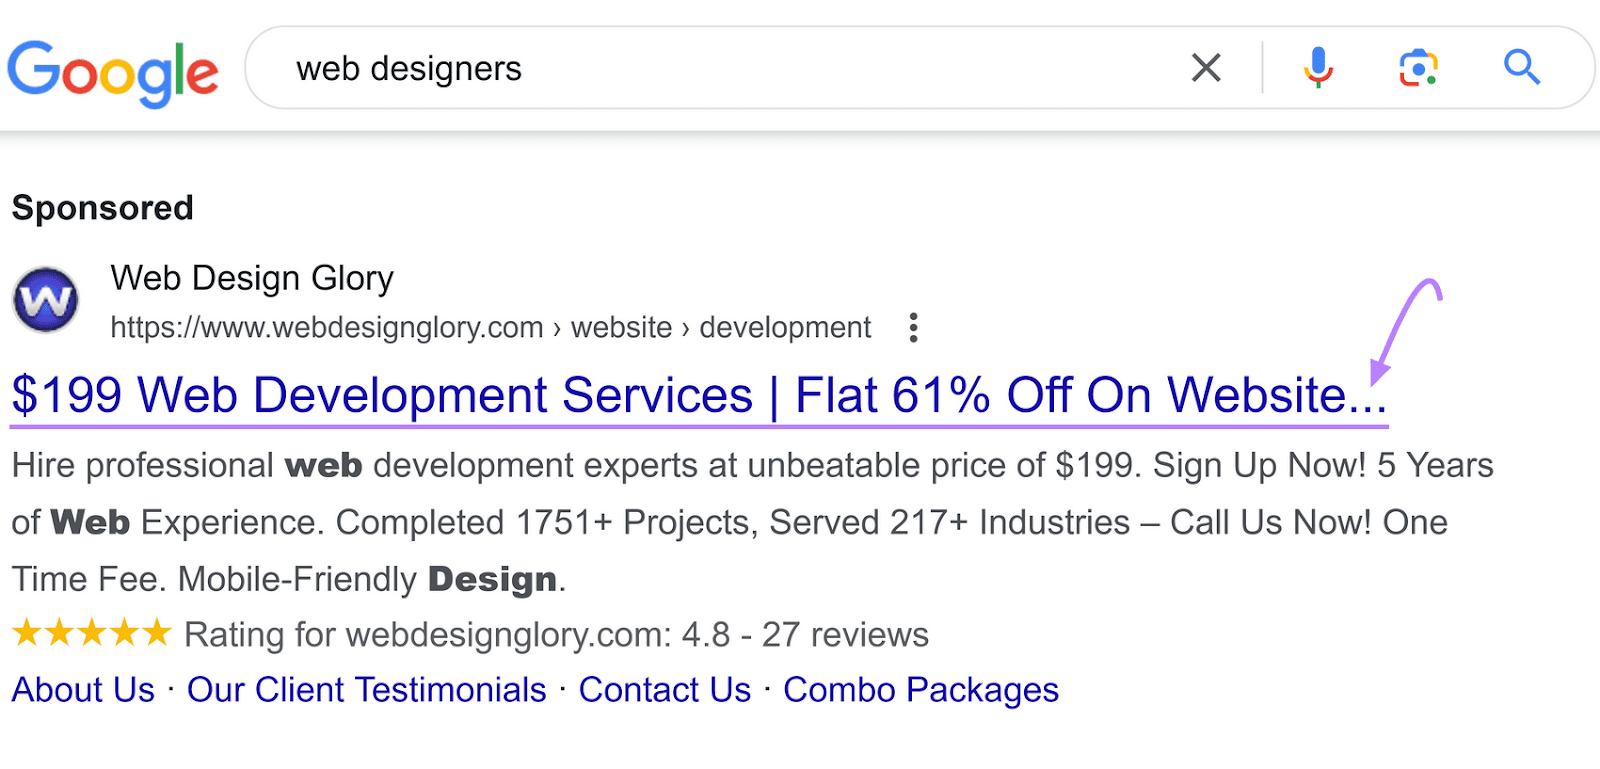 Google SERP for "web designers," highlighting a sponsored ad with a purple arrow pointing to an ellipsis after a title.